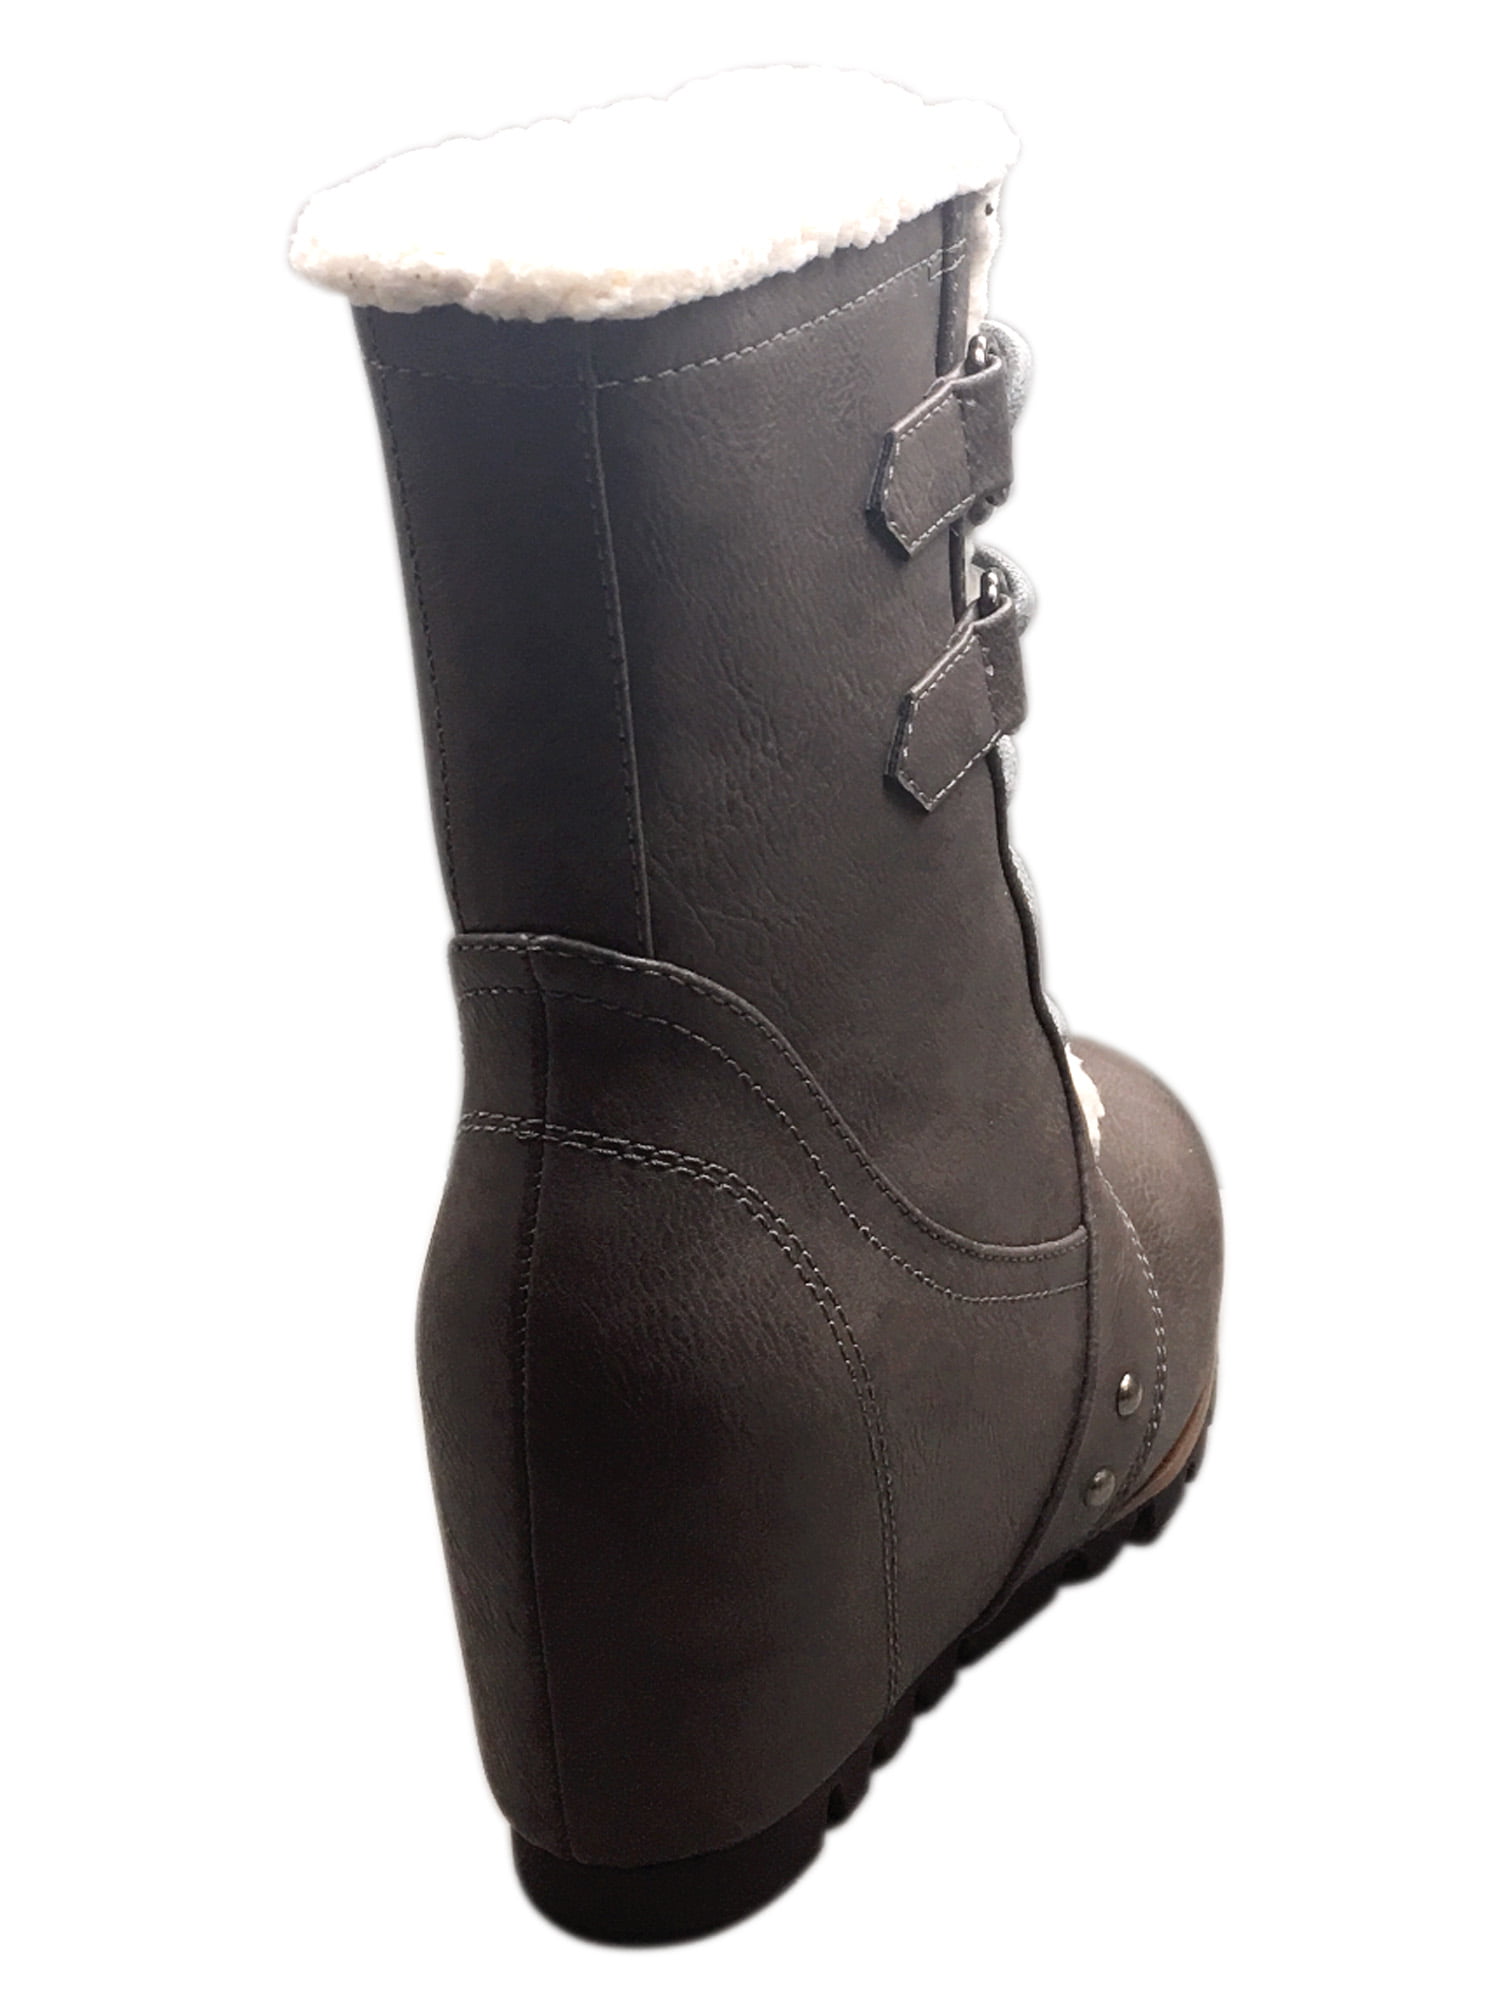 wedge winter boots women's shoes